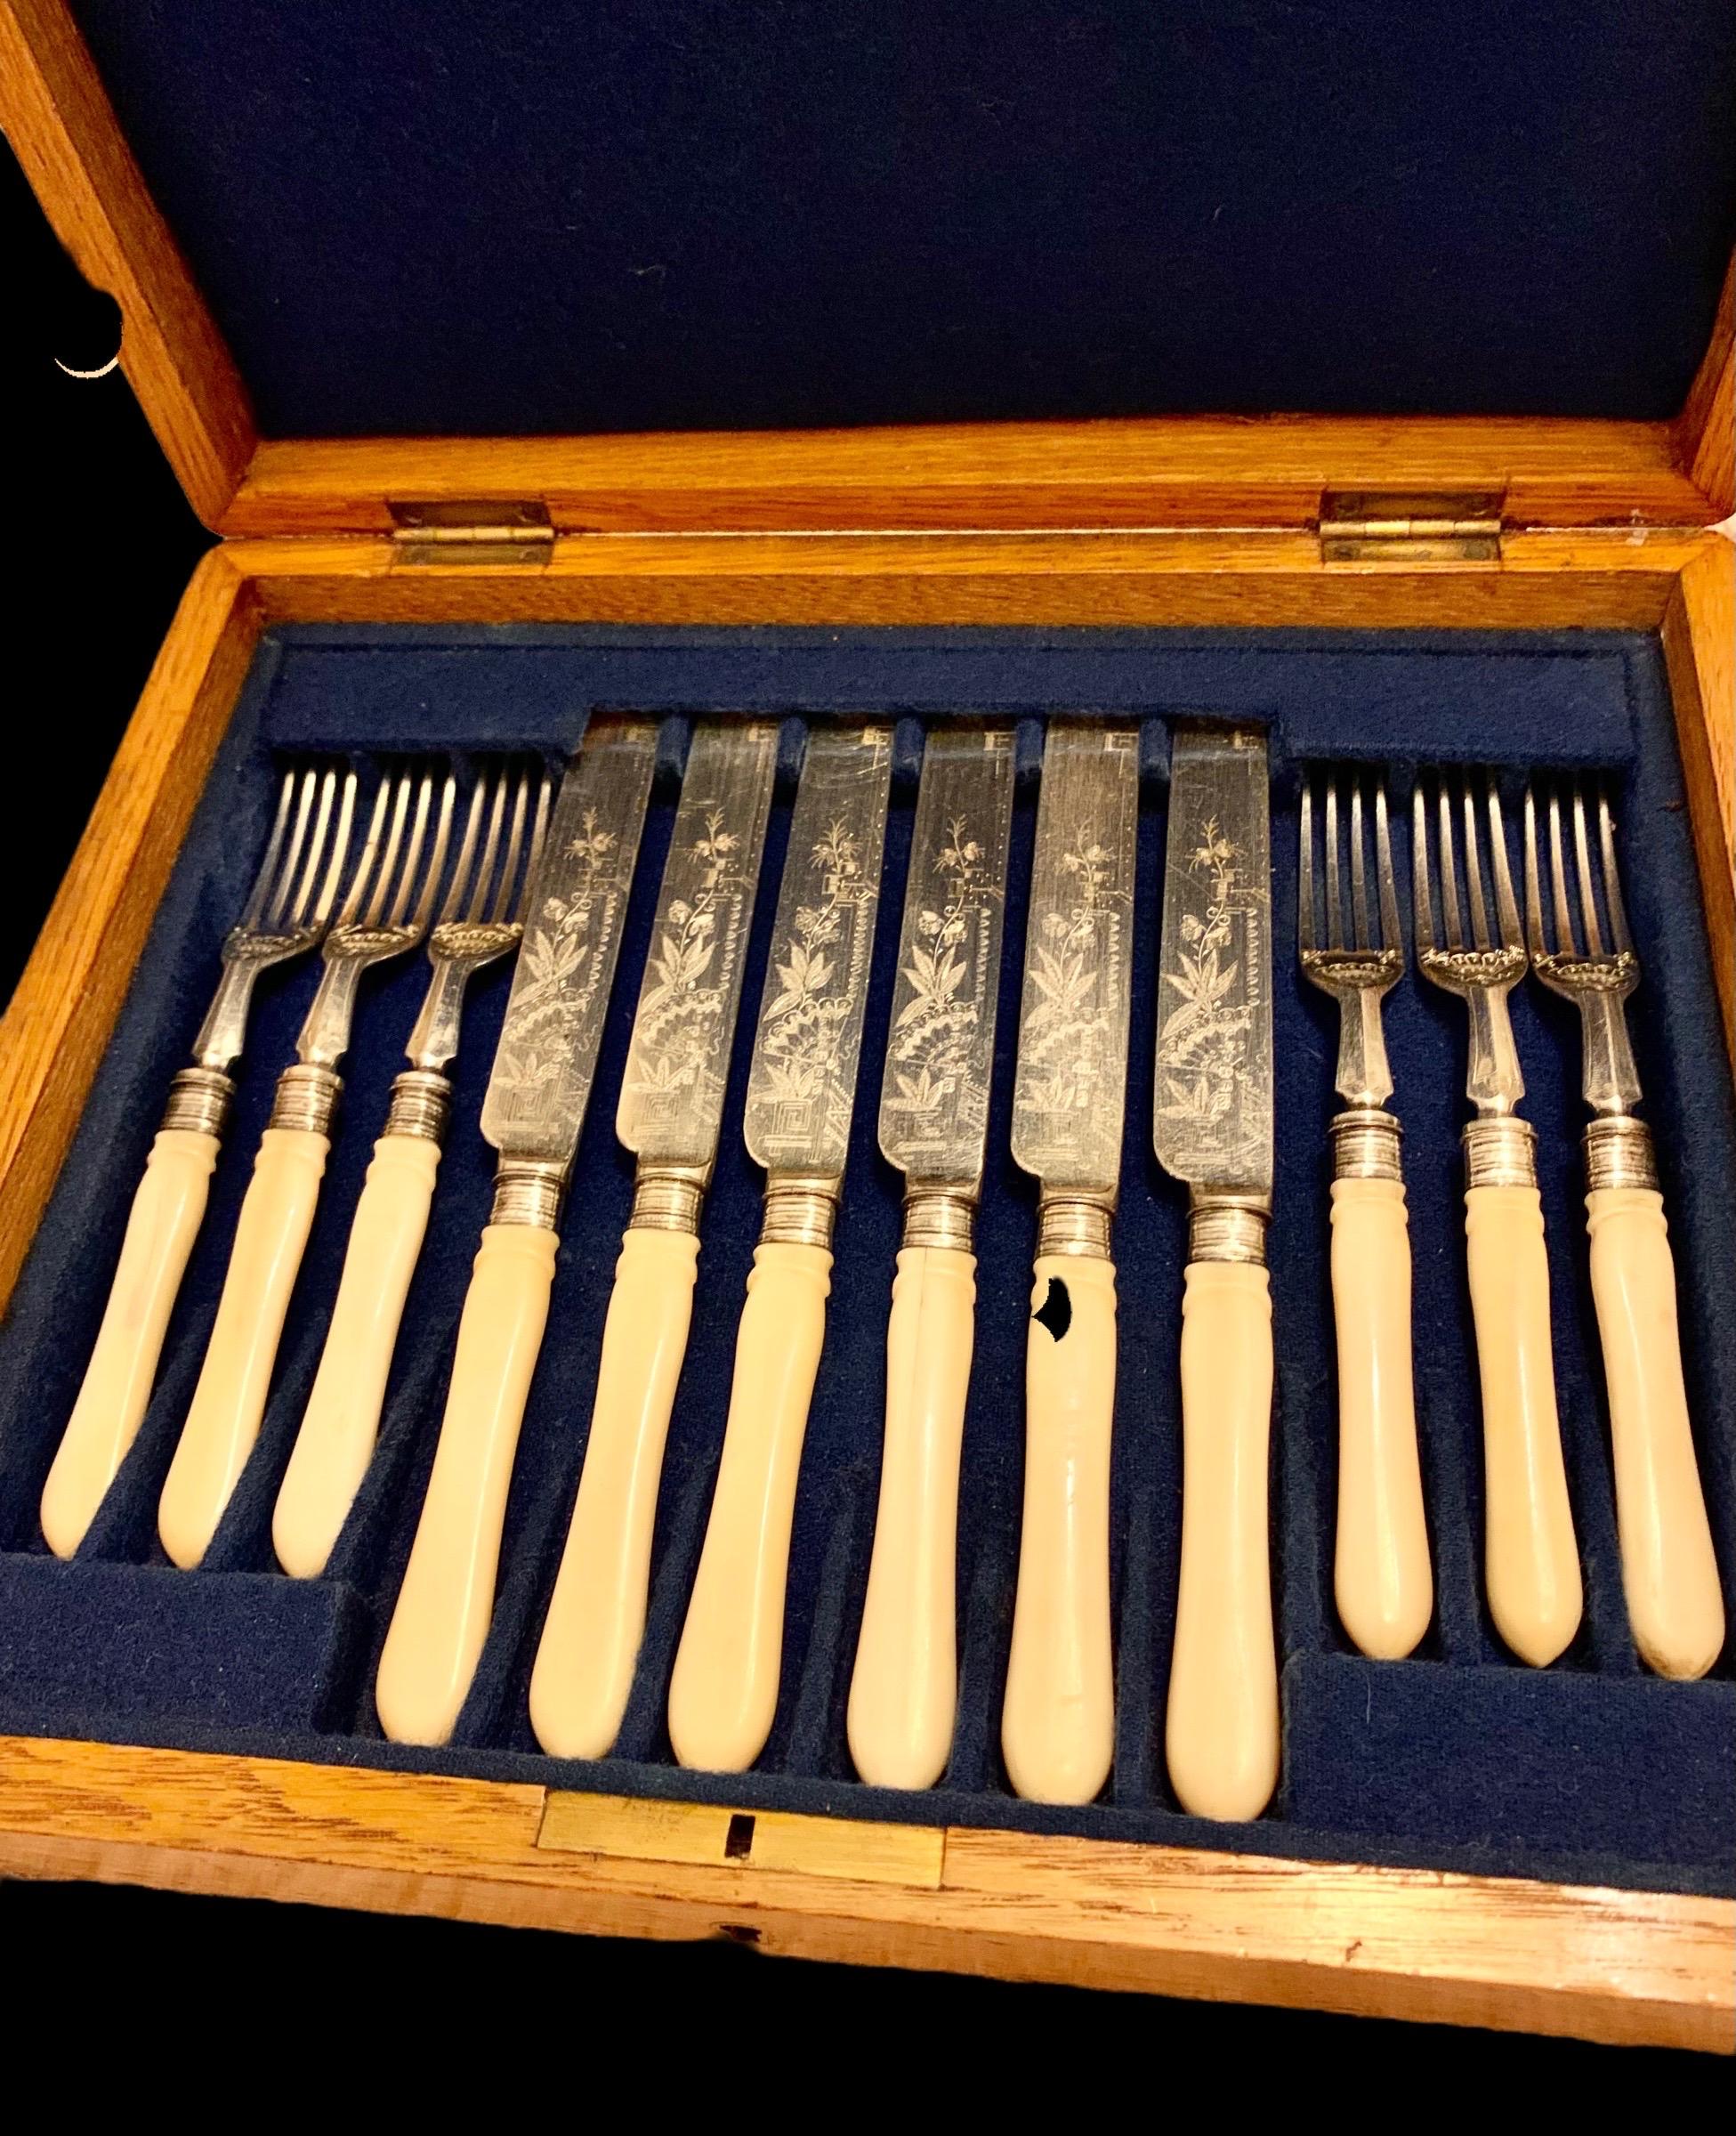 An antique English Edwardian silver-plate fish set for six in the Anglo Japanese style having Bakelite handles and lovely engraving of Japanese fans and flora, all encased in a solid oak presentation box with cobalt blue velvet lining.

Both